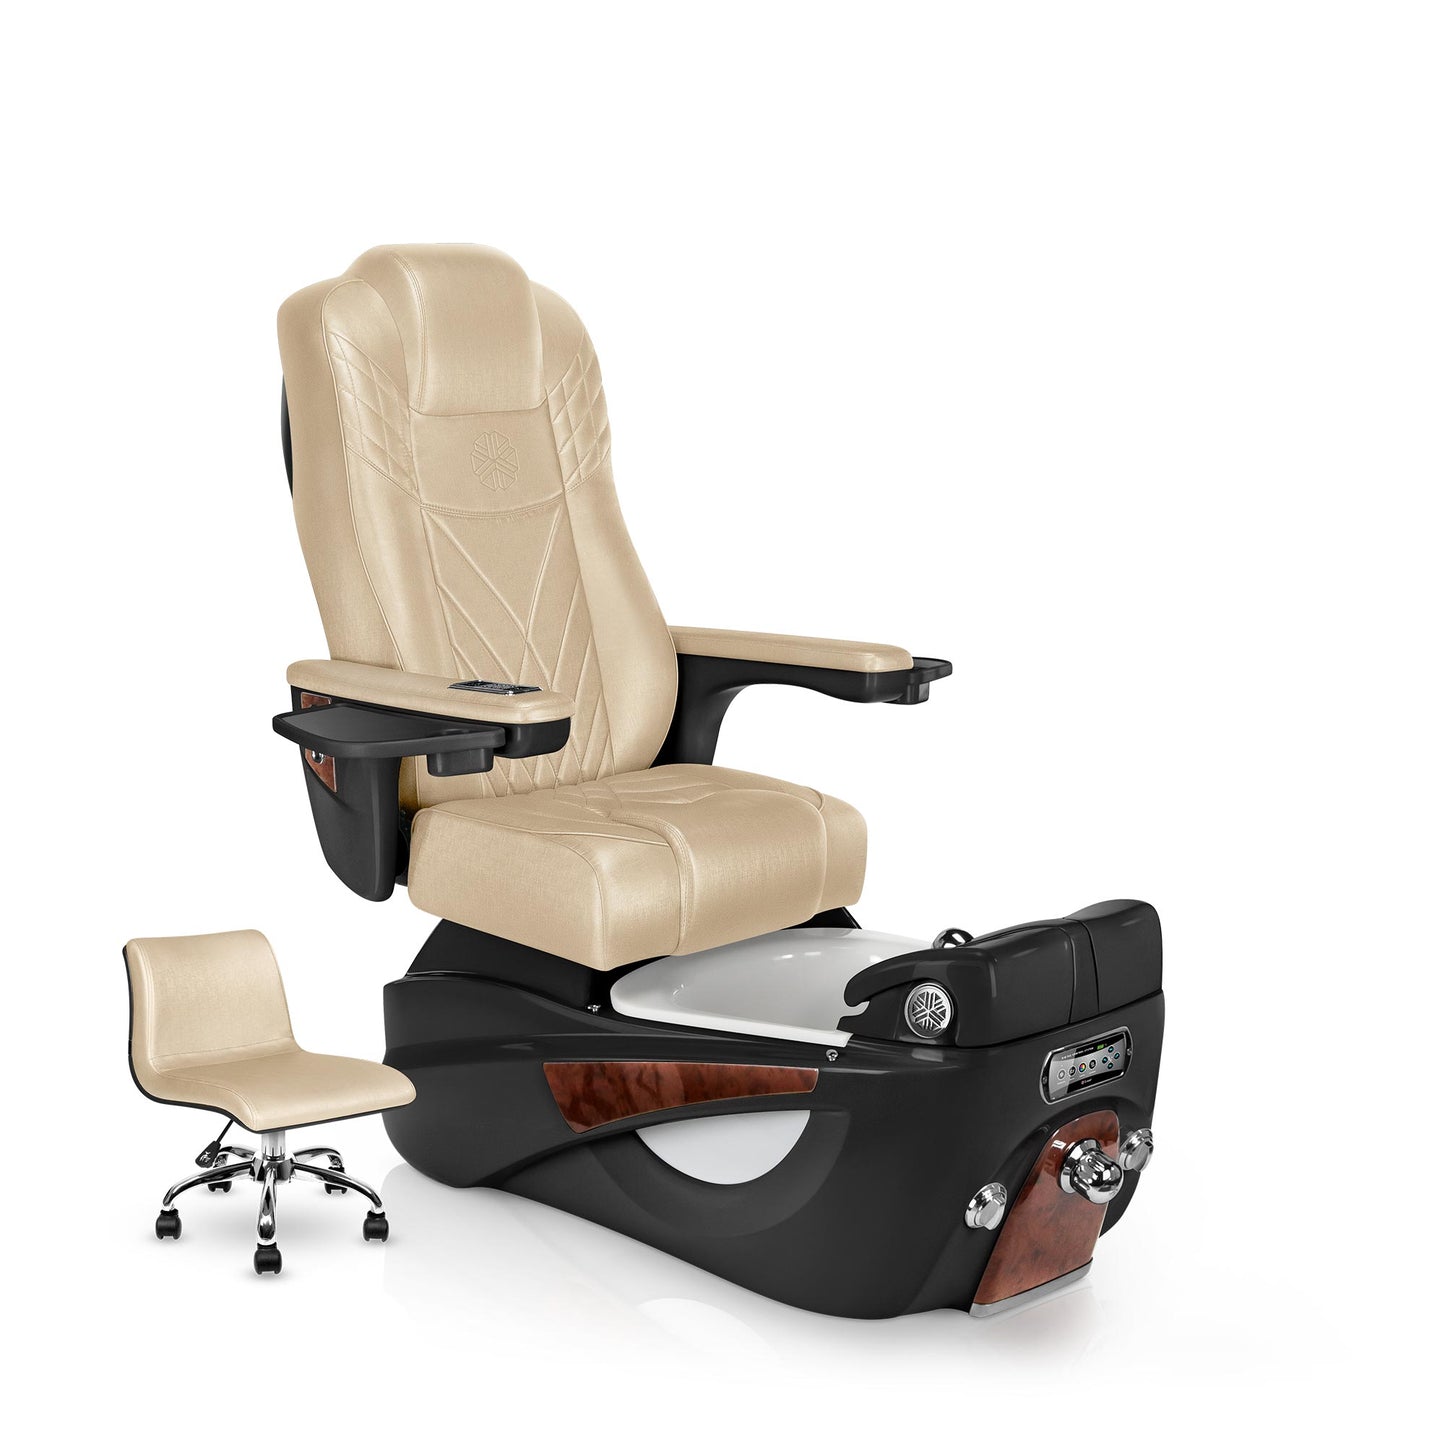 Lexor LUMINOUS pedicure chair with glazed gold cushion and espresso spa base